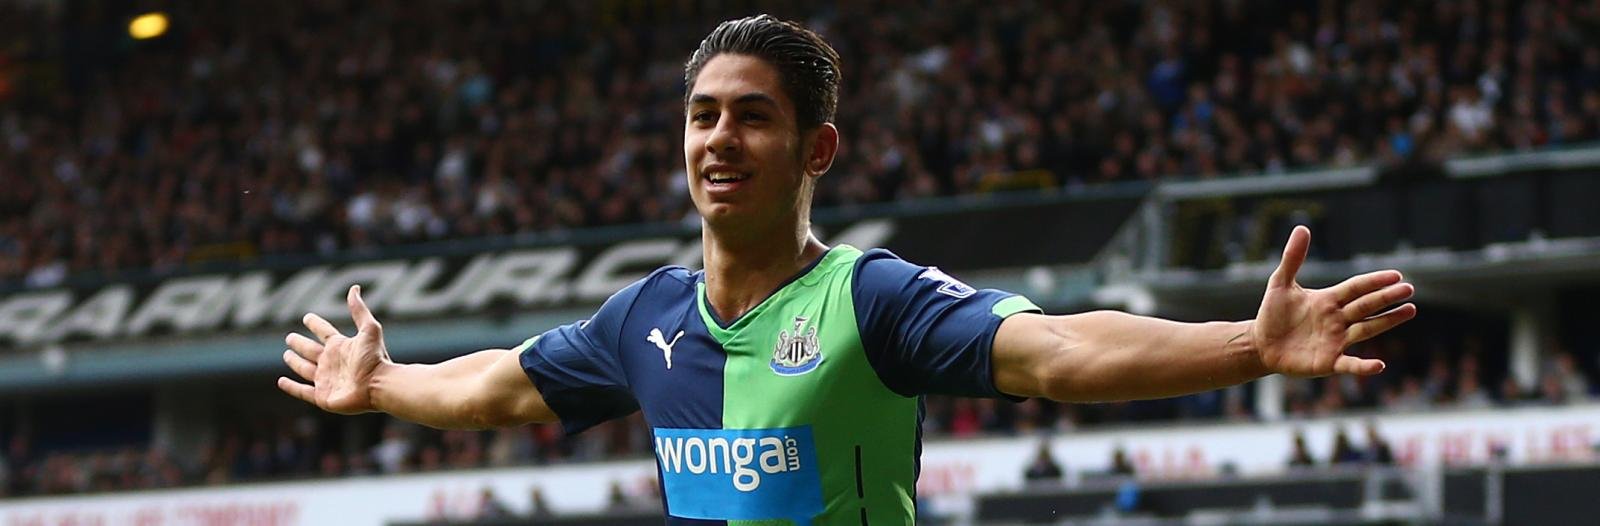 Perez: “Really happy” after signing new long-term deal with Newcastle United